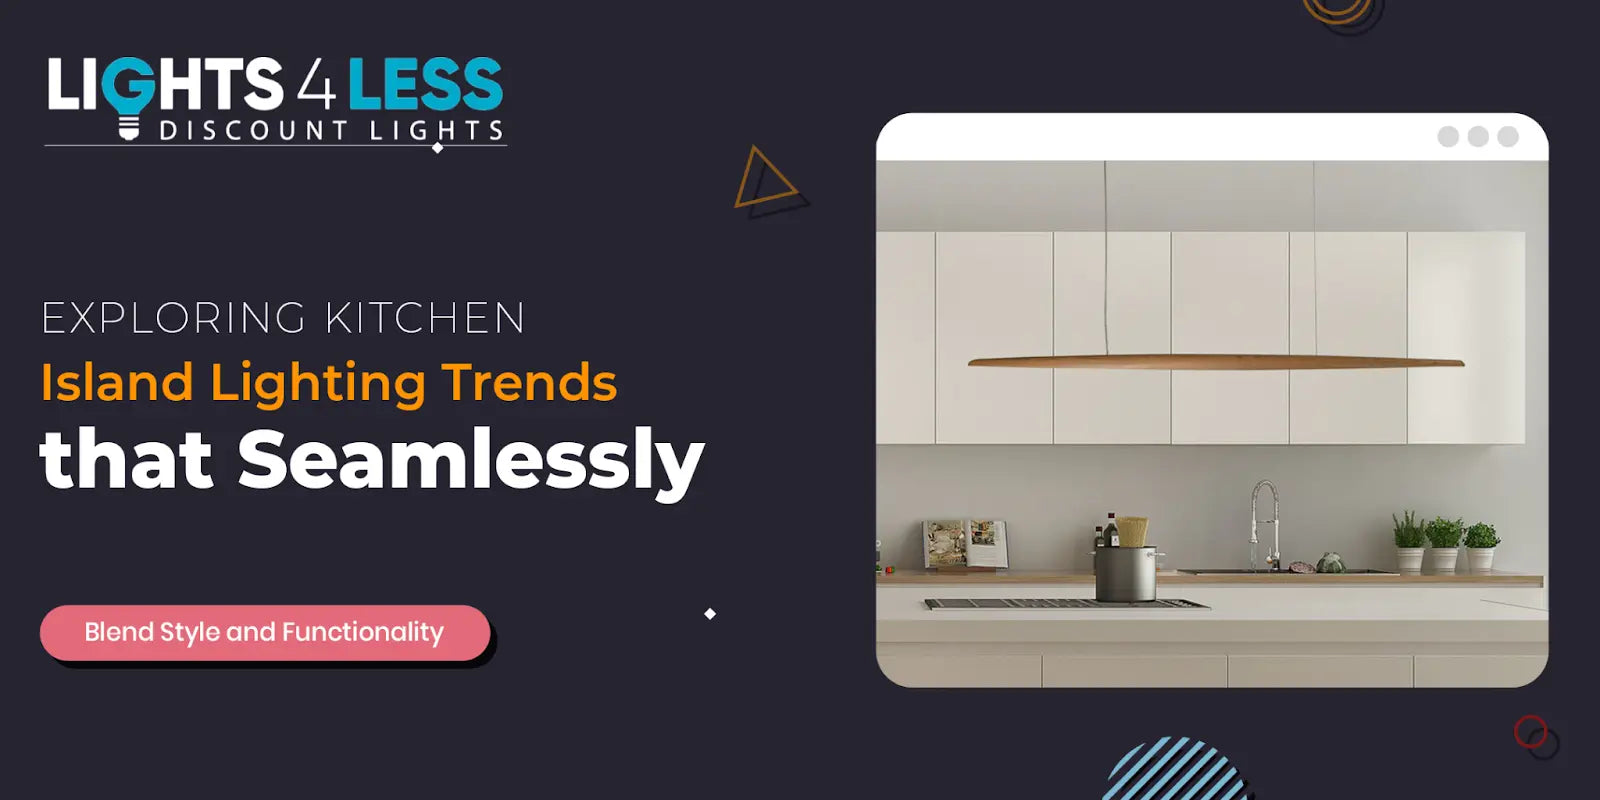 Exploring Kitchen Island Lightning Trends that Seamlessly